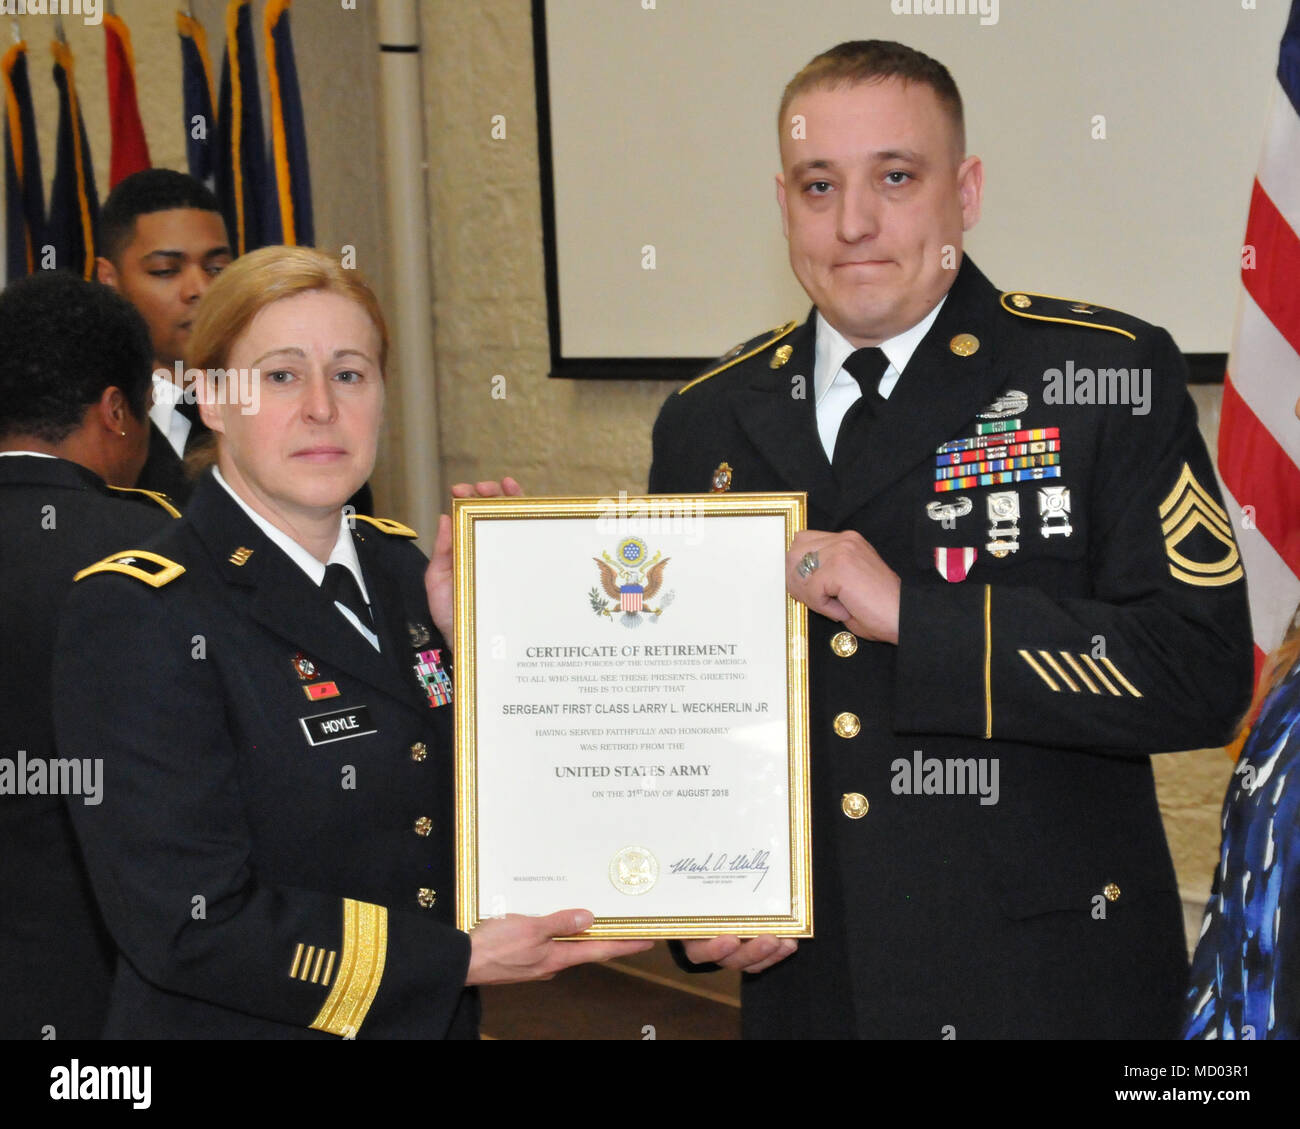 Sgt. 1st Class Larry Weckherlin receives his certificate of retirement from Brig. Gen. Heidi Hoyle during the Rock Island Arsenal Retirement and Retreat Ceremony, March 8. (Photo by: Tony Lopez, JMC Public and Congressional Affairs) Stock Photo